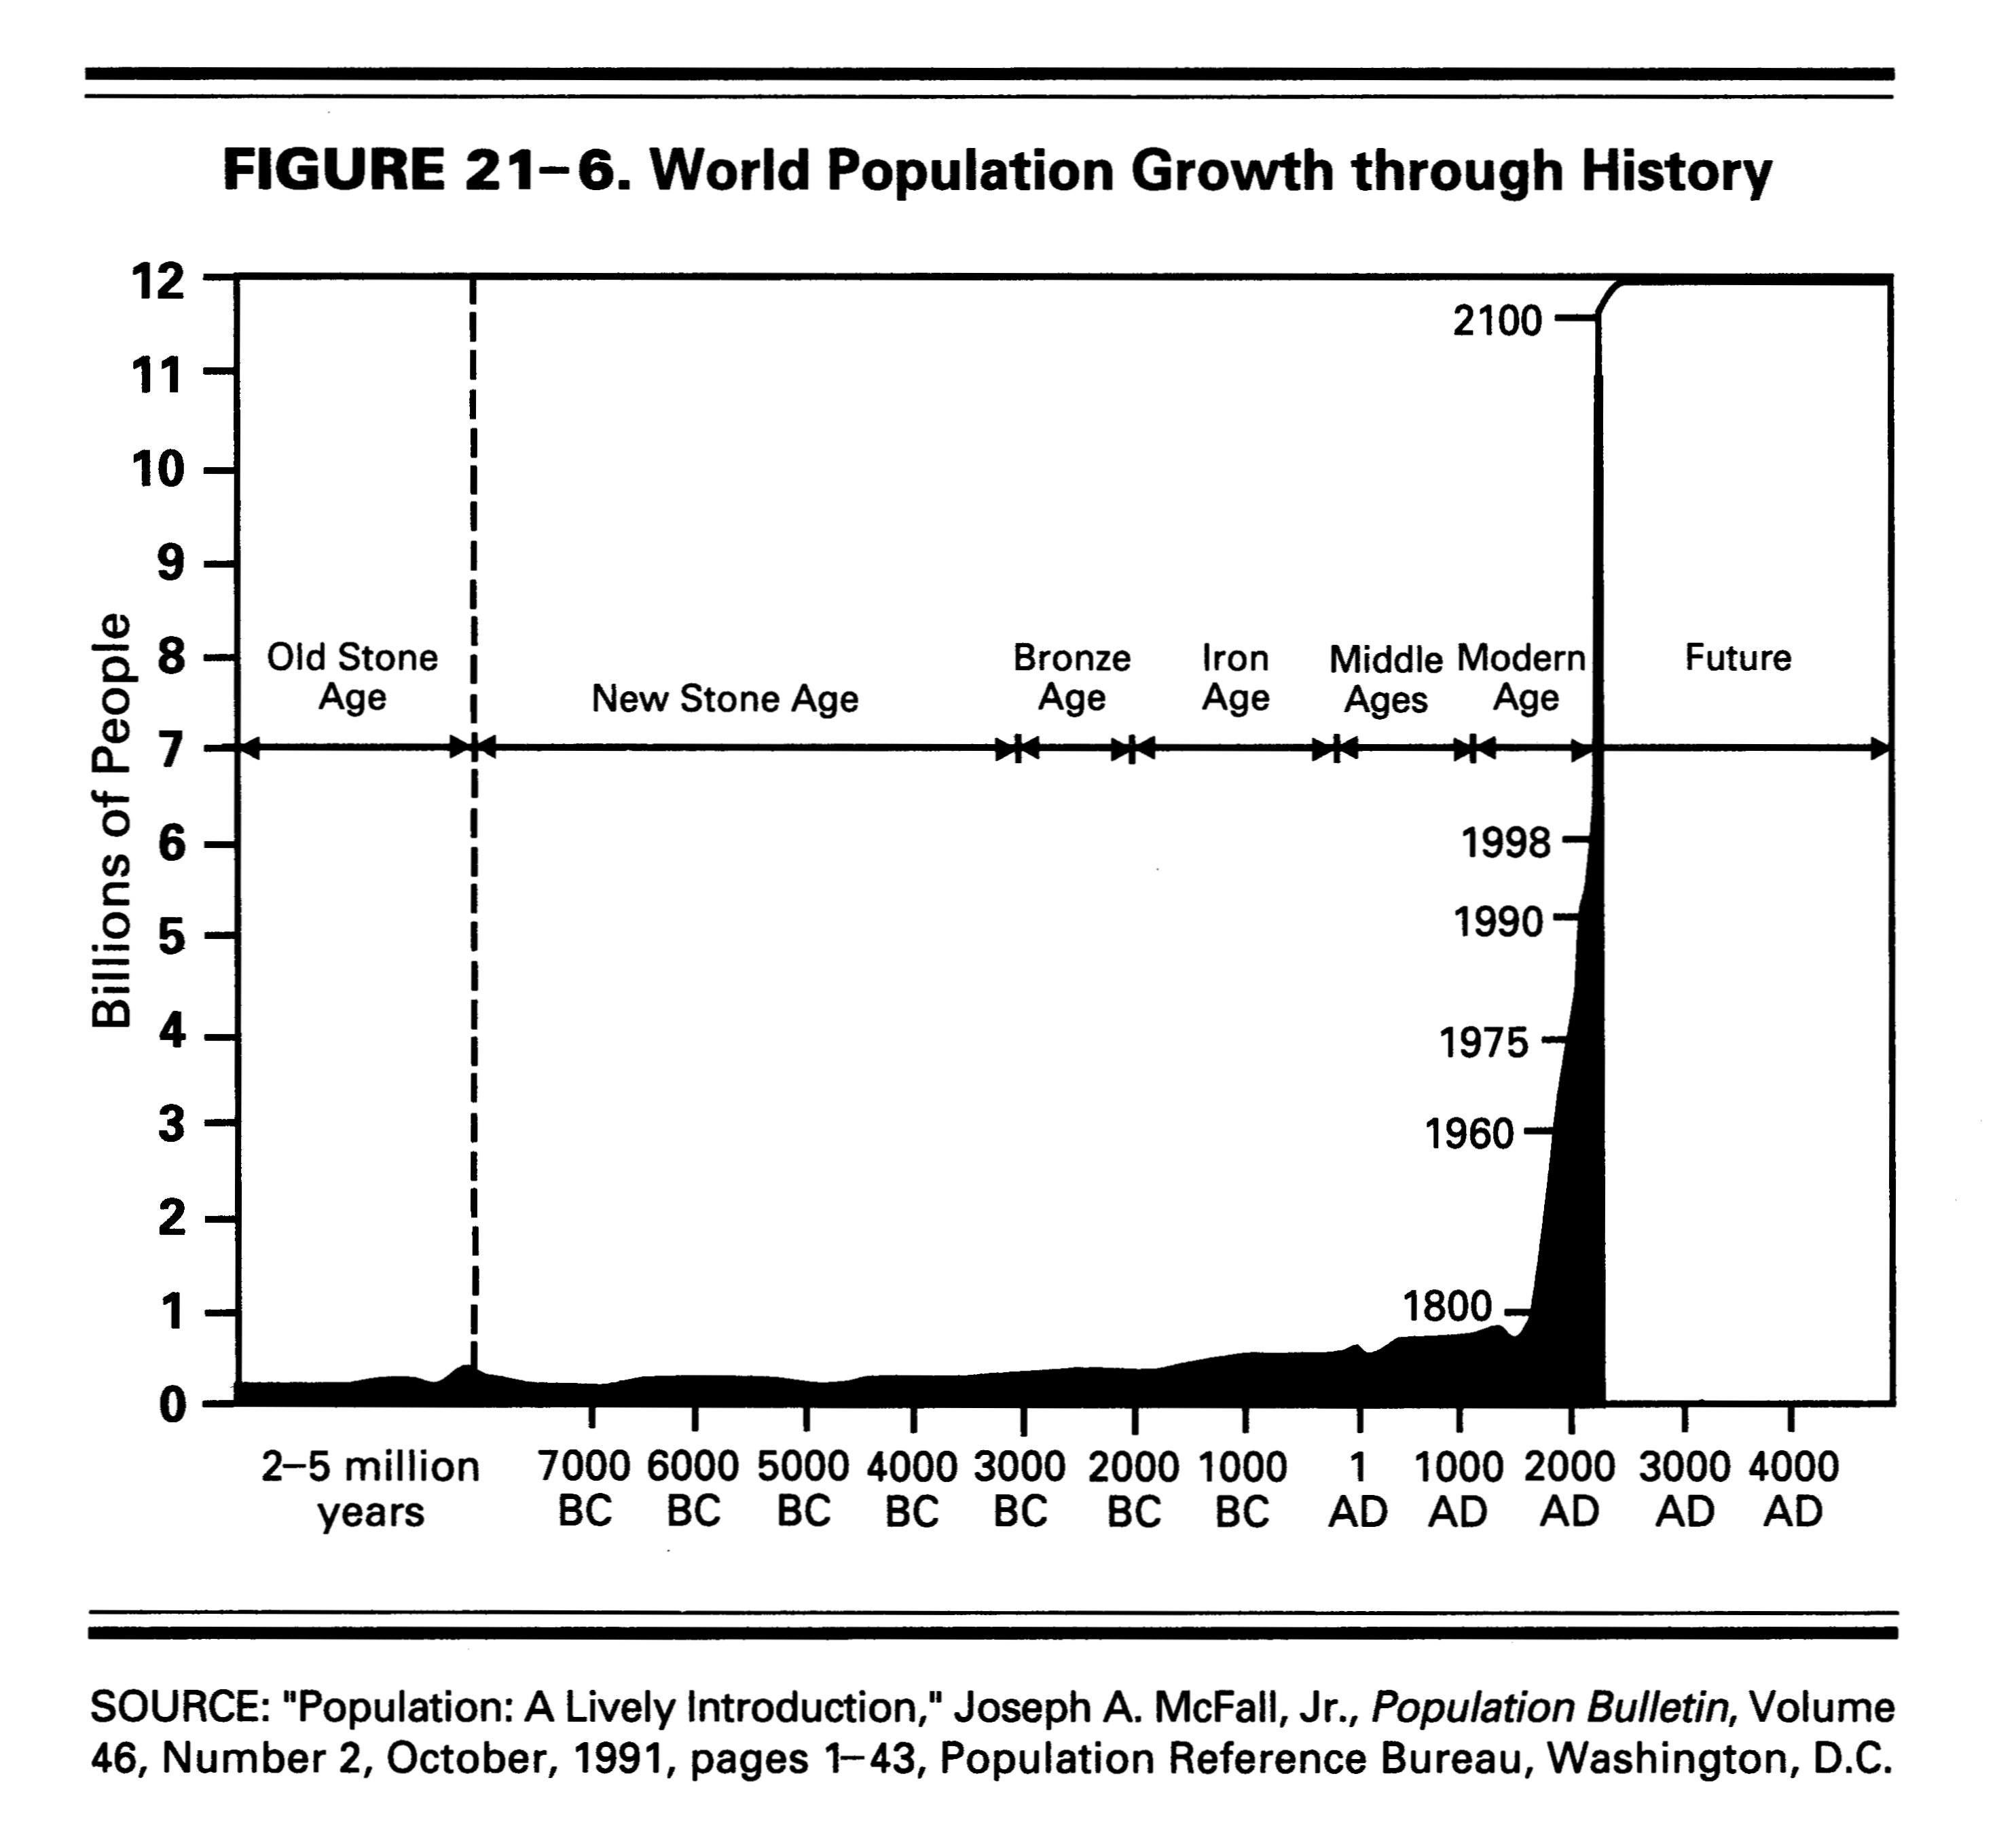 https://www.guibord.com/democracy/files-images/world-population-growth-through-history.jpg